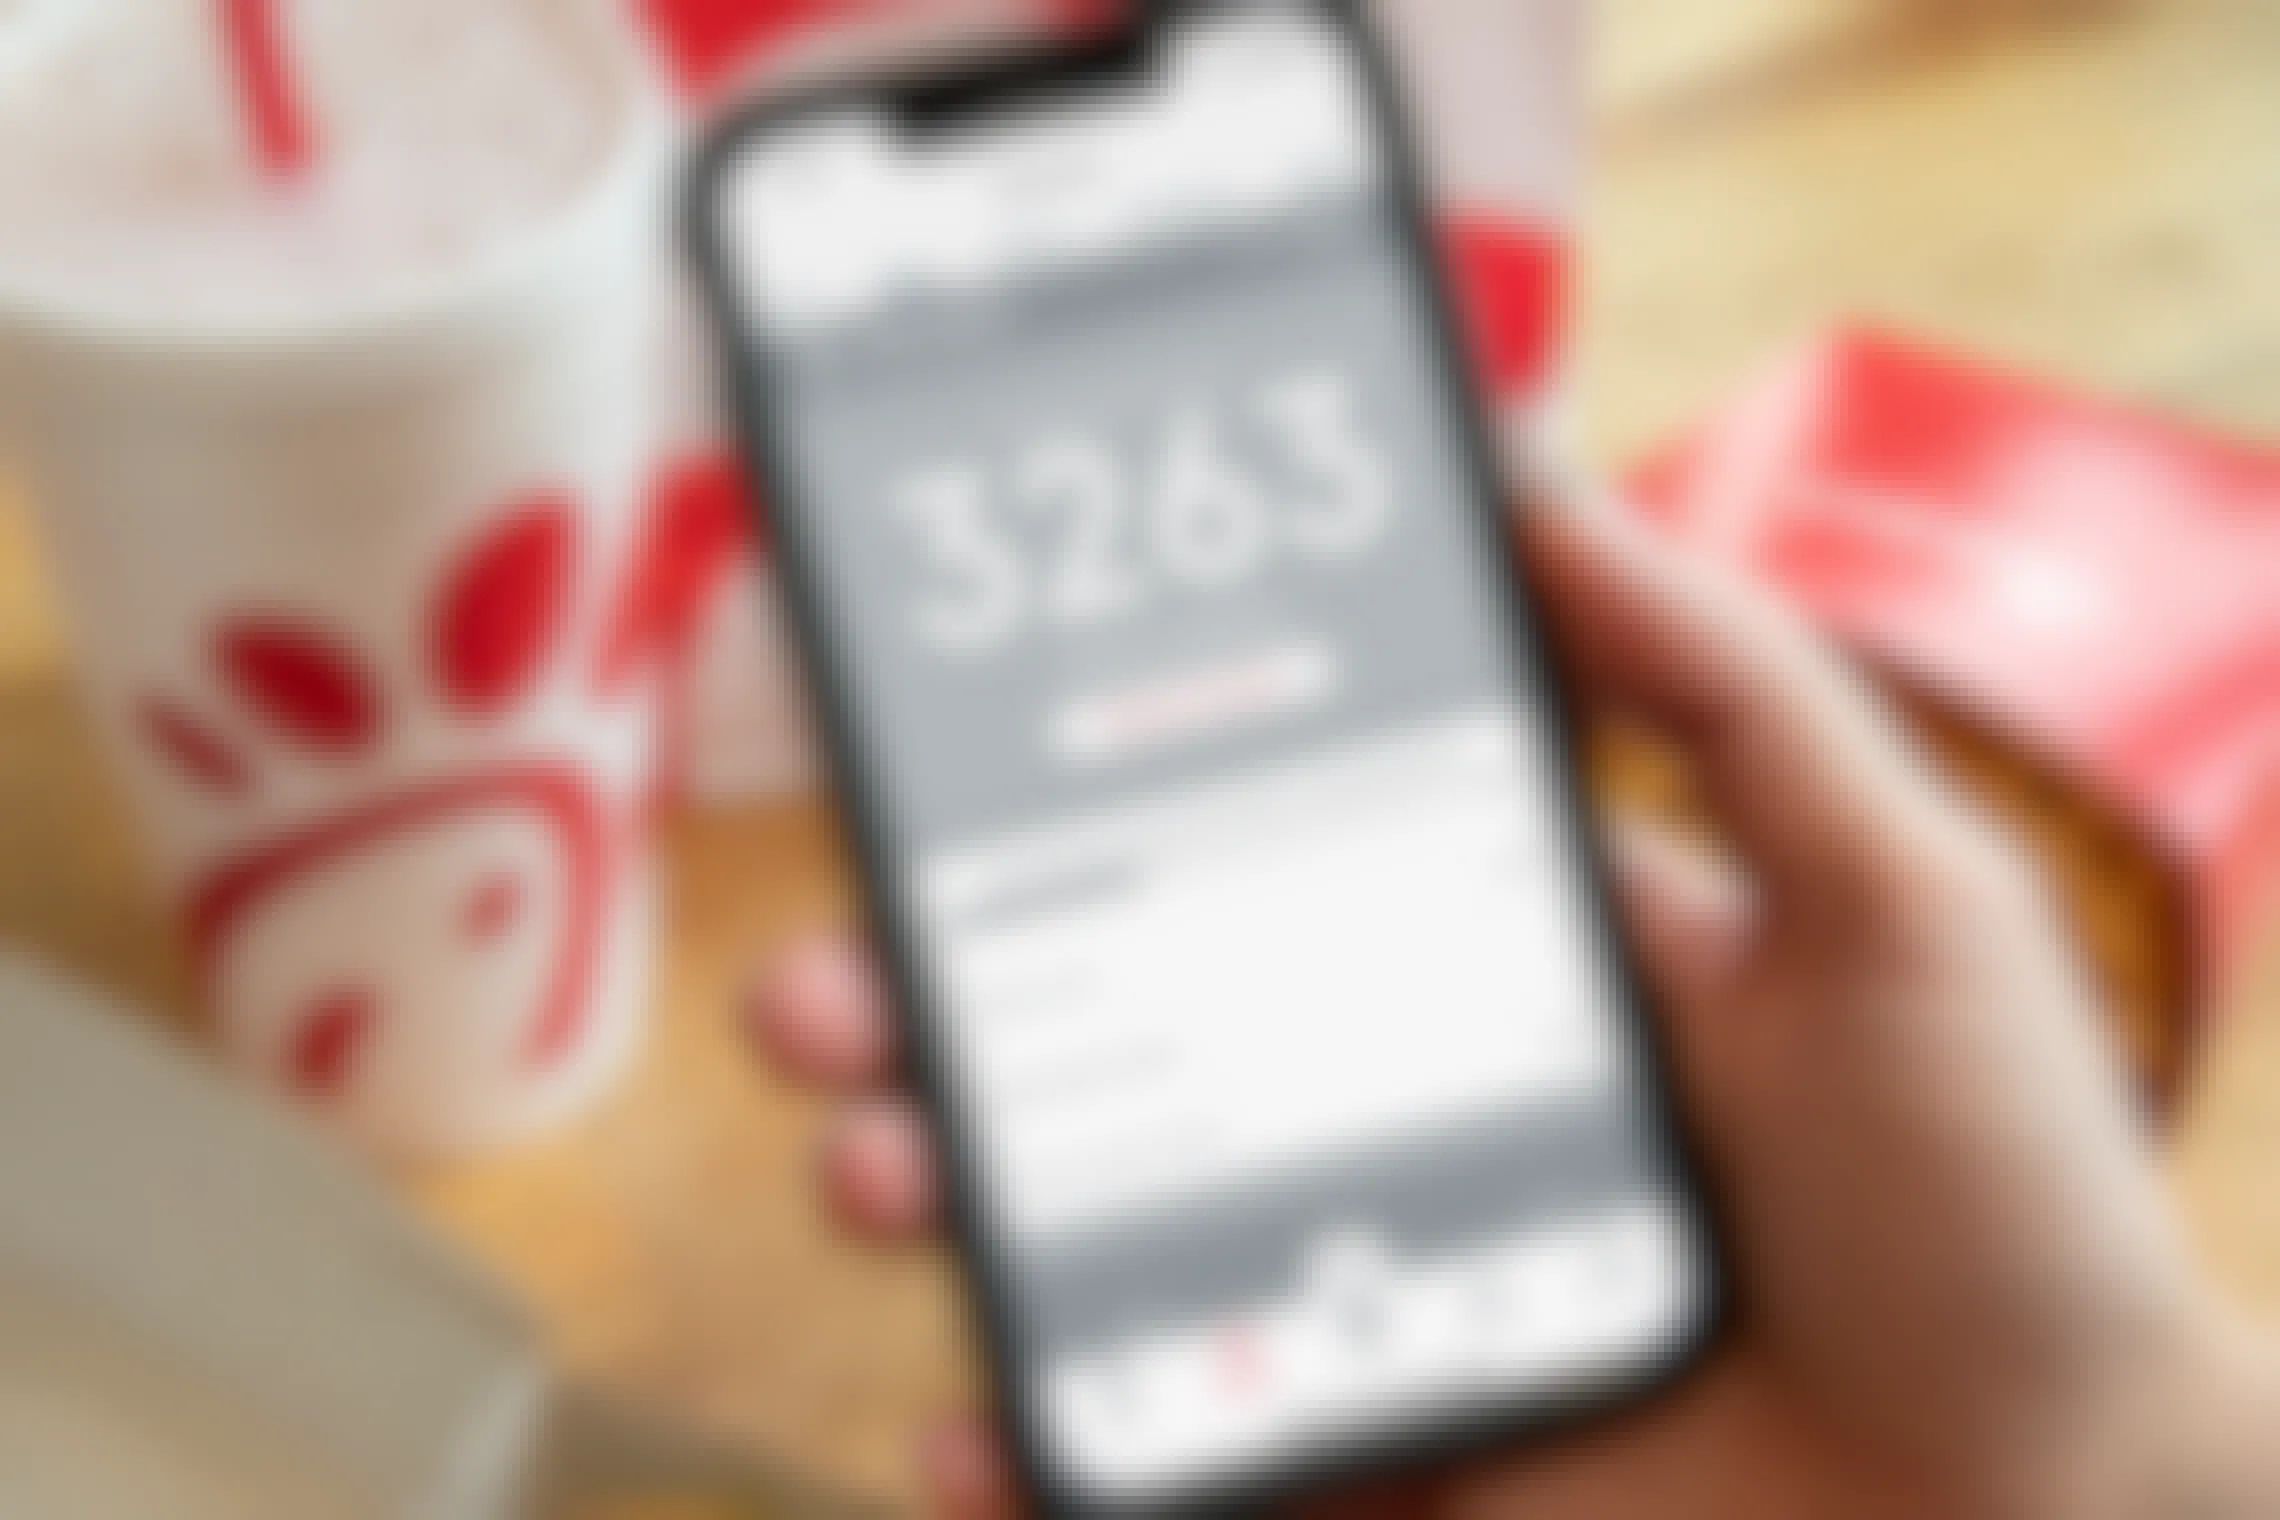 A person's hand holding an iPhone displaying the Points tab of the Chick-fil-A mobile app with a box of Chick-fil-A waffle fries, a takeout bag, and a fountain drink cup on the table in the background.